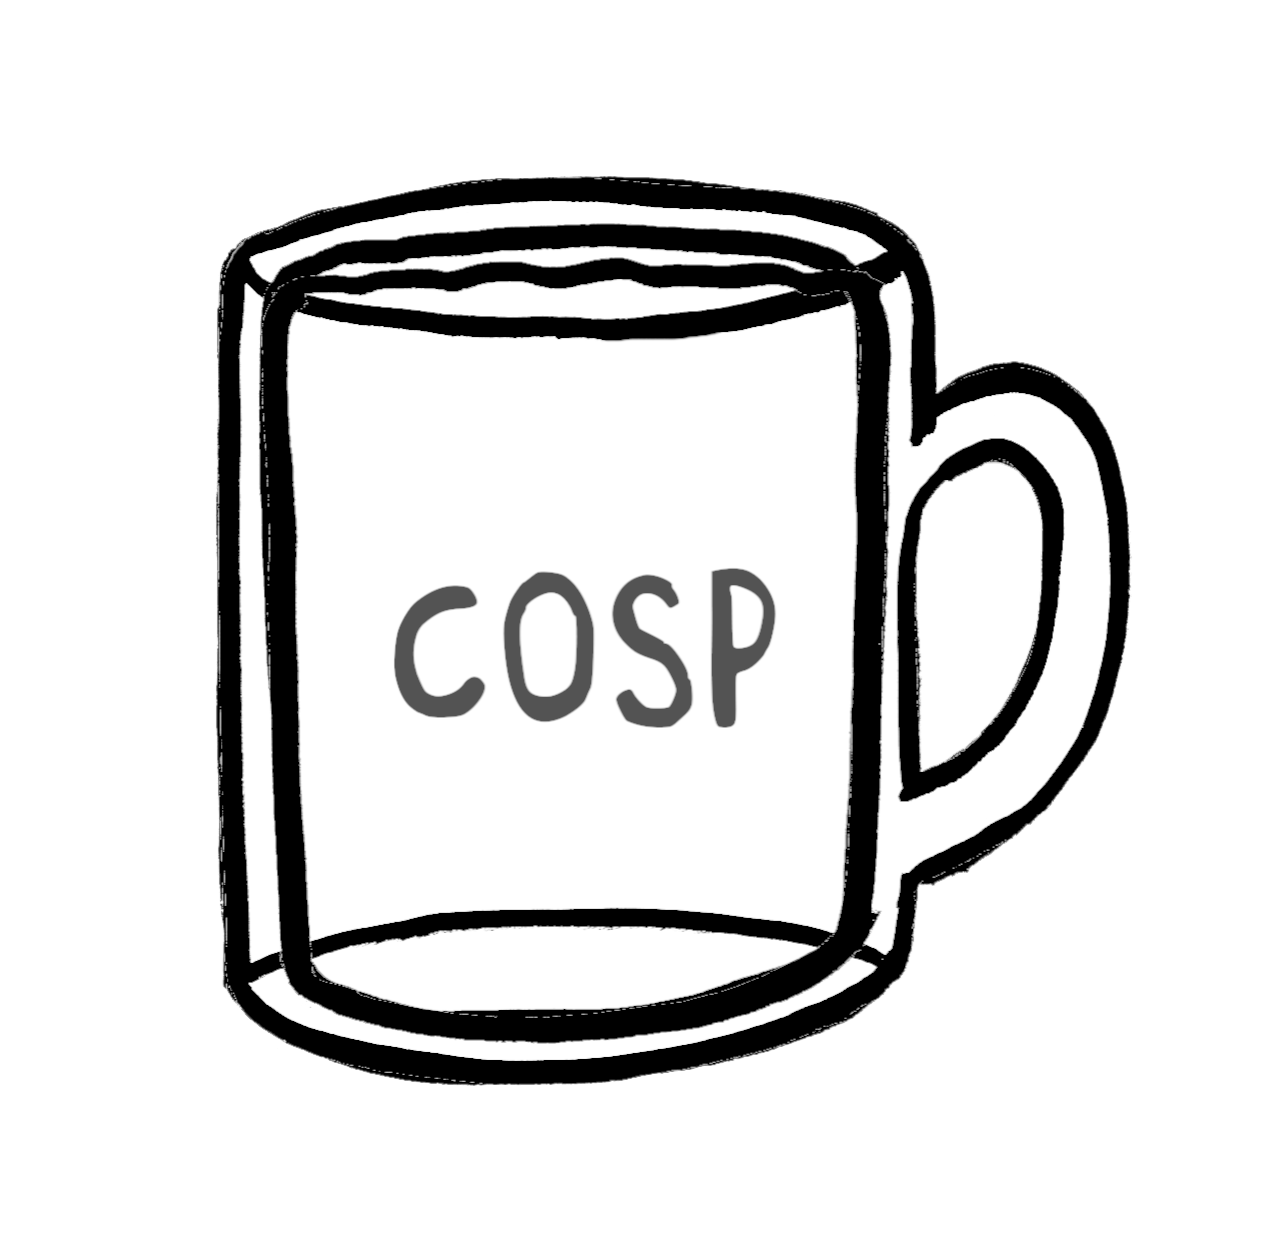 Illustration of a cup that is full